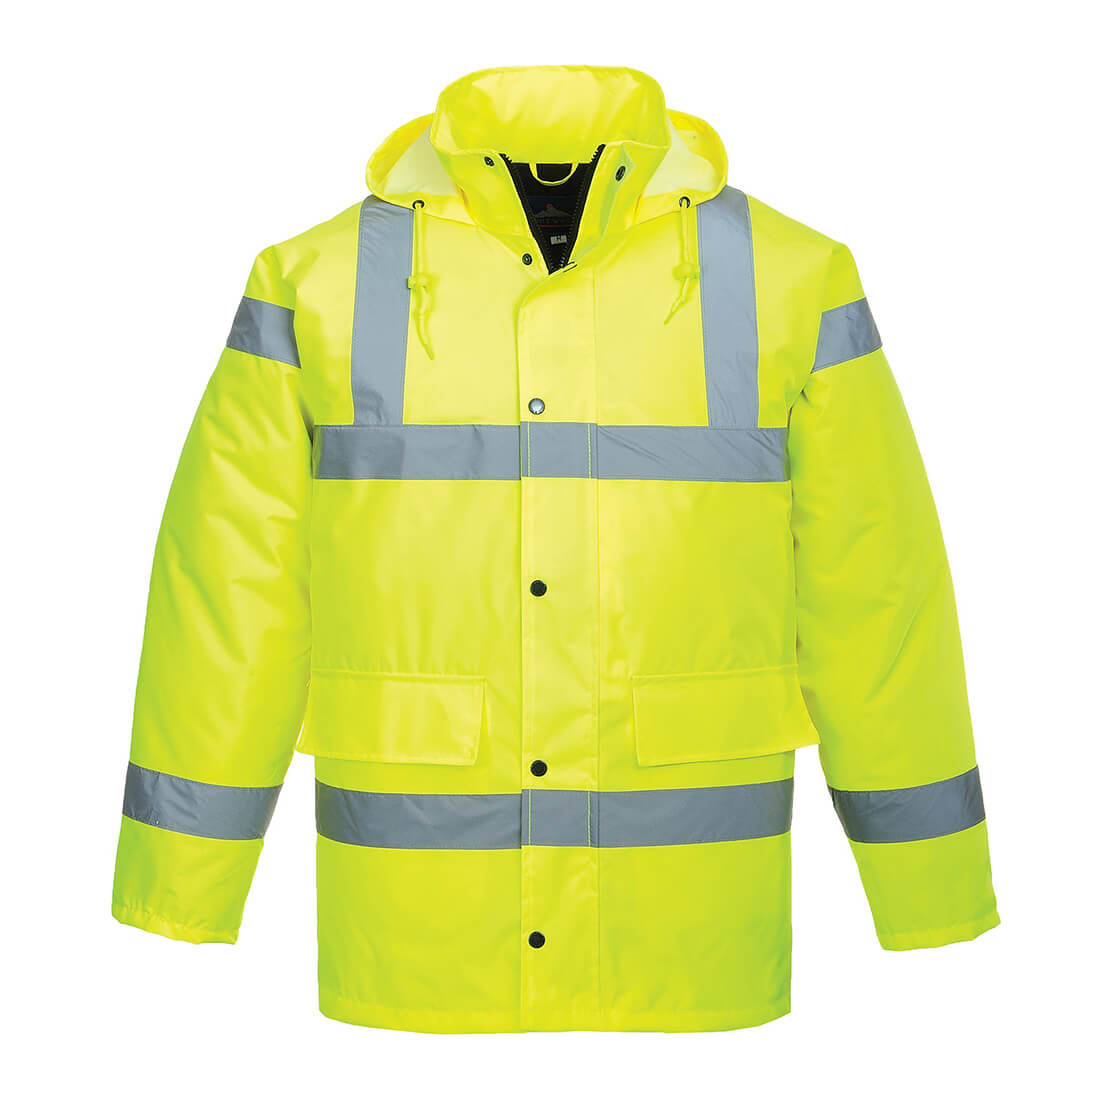 Image of Oxford Weave 300D Class 3 Hi Vis Traffic Jacket Yellow 2XL